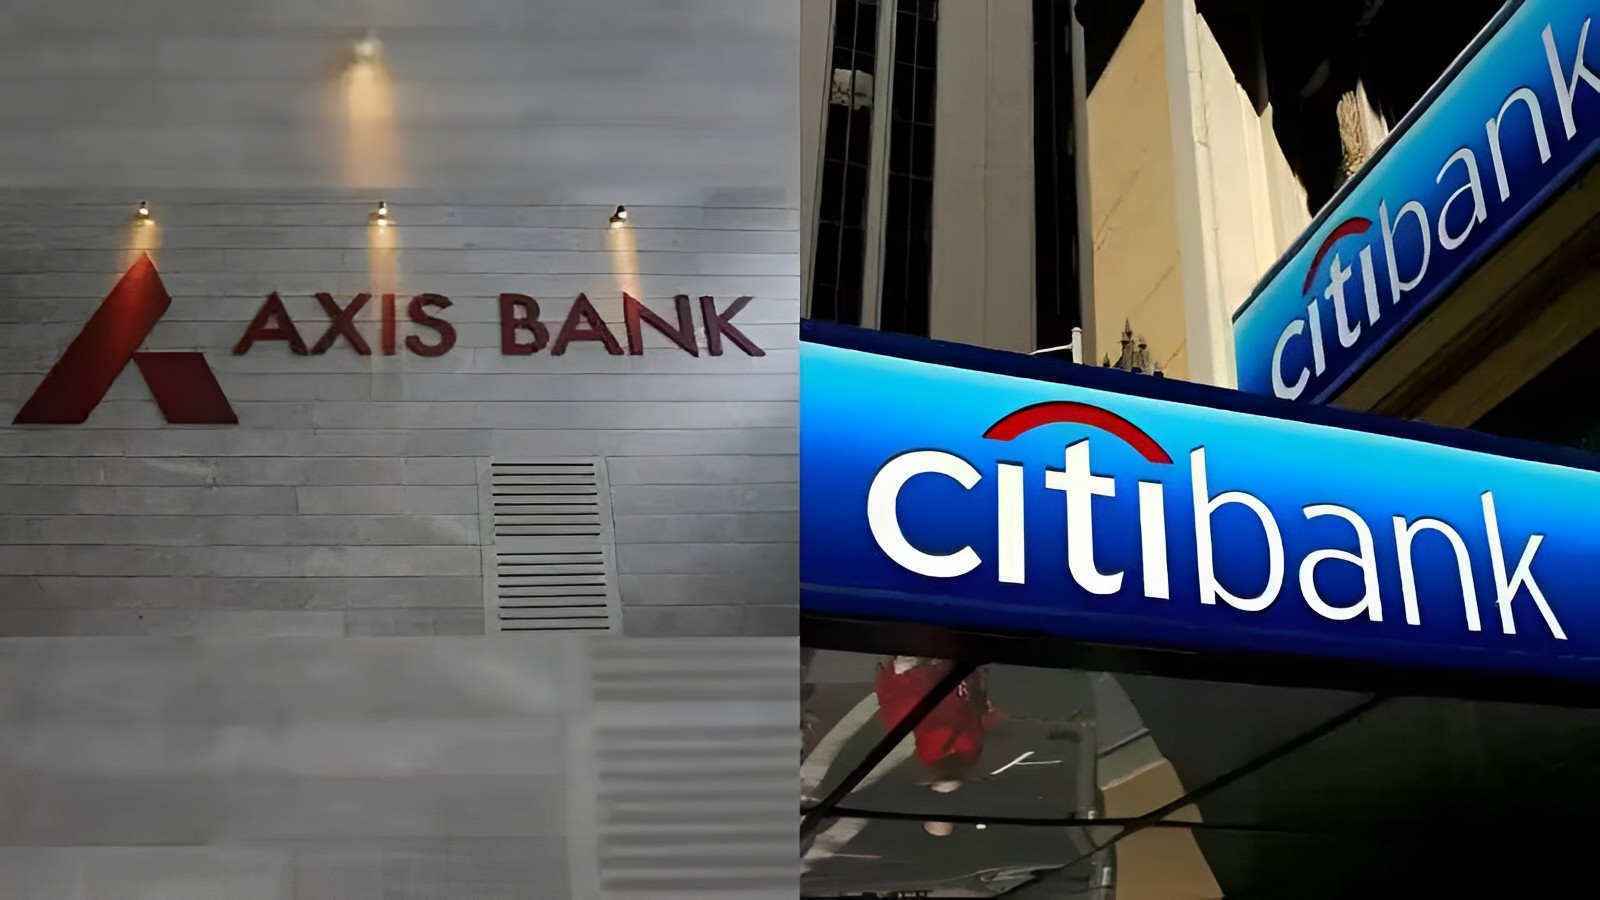 Axis Bank acquires Citi consumer business: Impact on customers